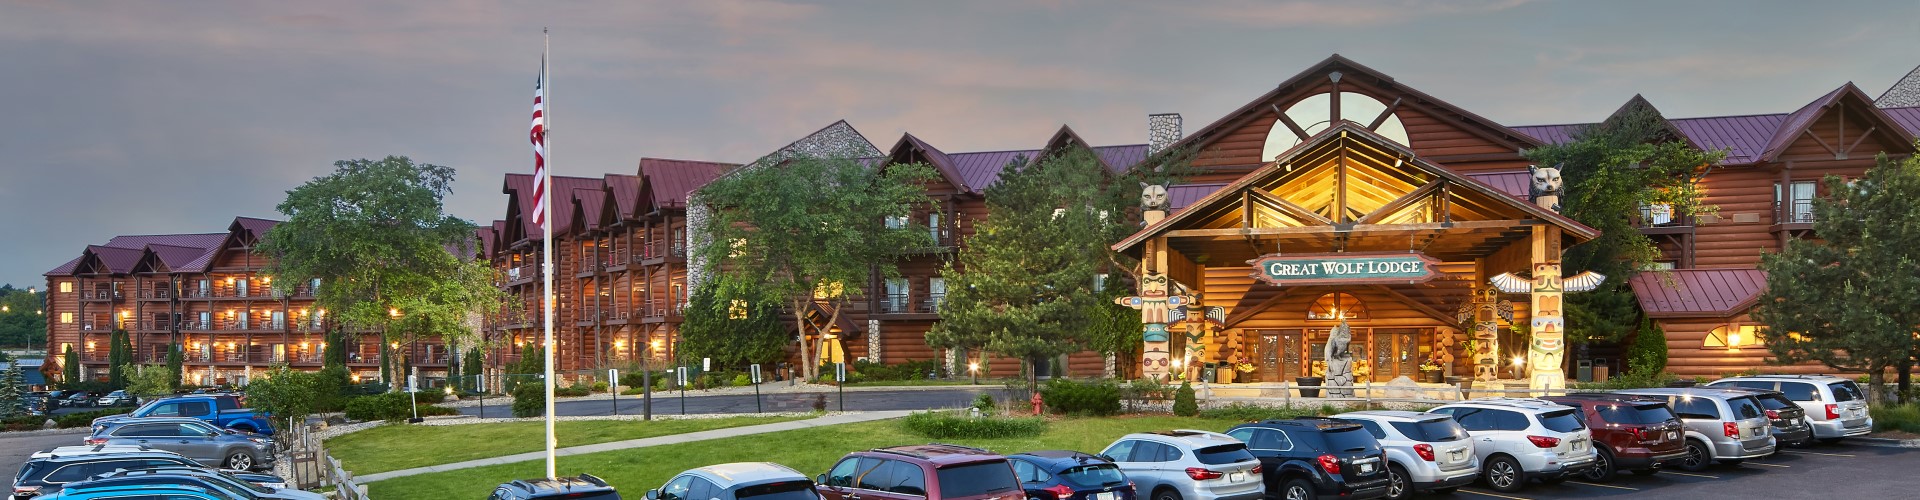 Great wolf lodge Wisconsin Dells